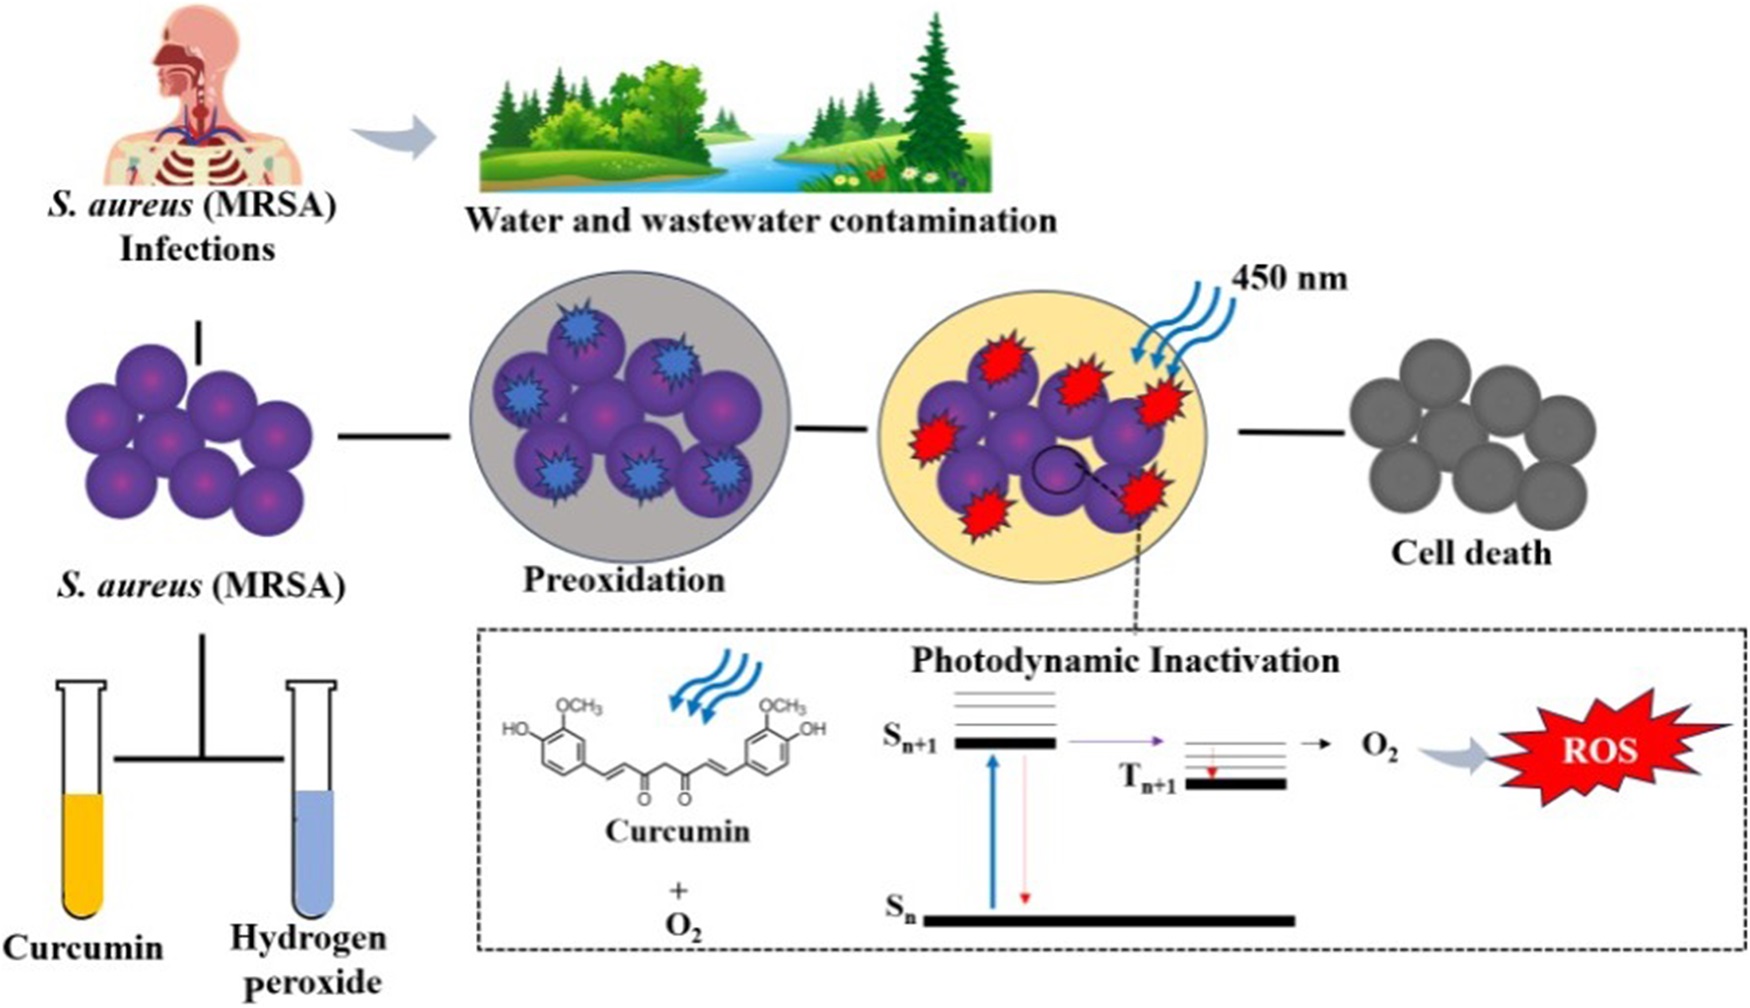 Hydrogen peroxide preoxidation as a strategy for enhanced antimicrobial photodynamic action against methicillin-resistant Staphylococcus aureus.